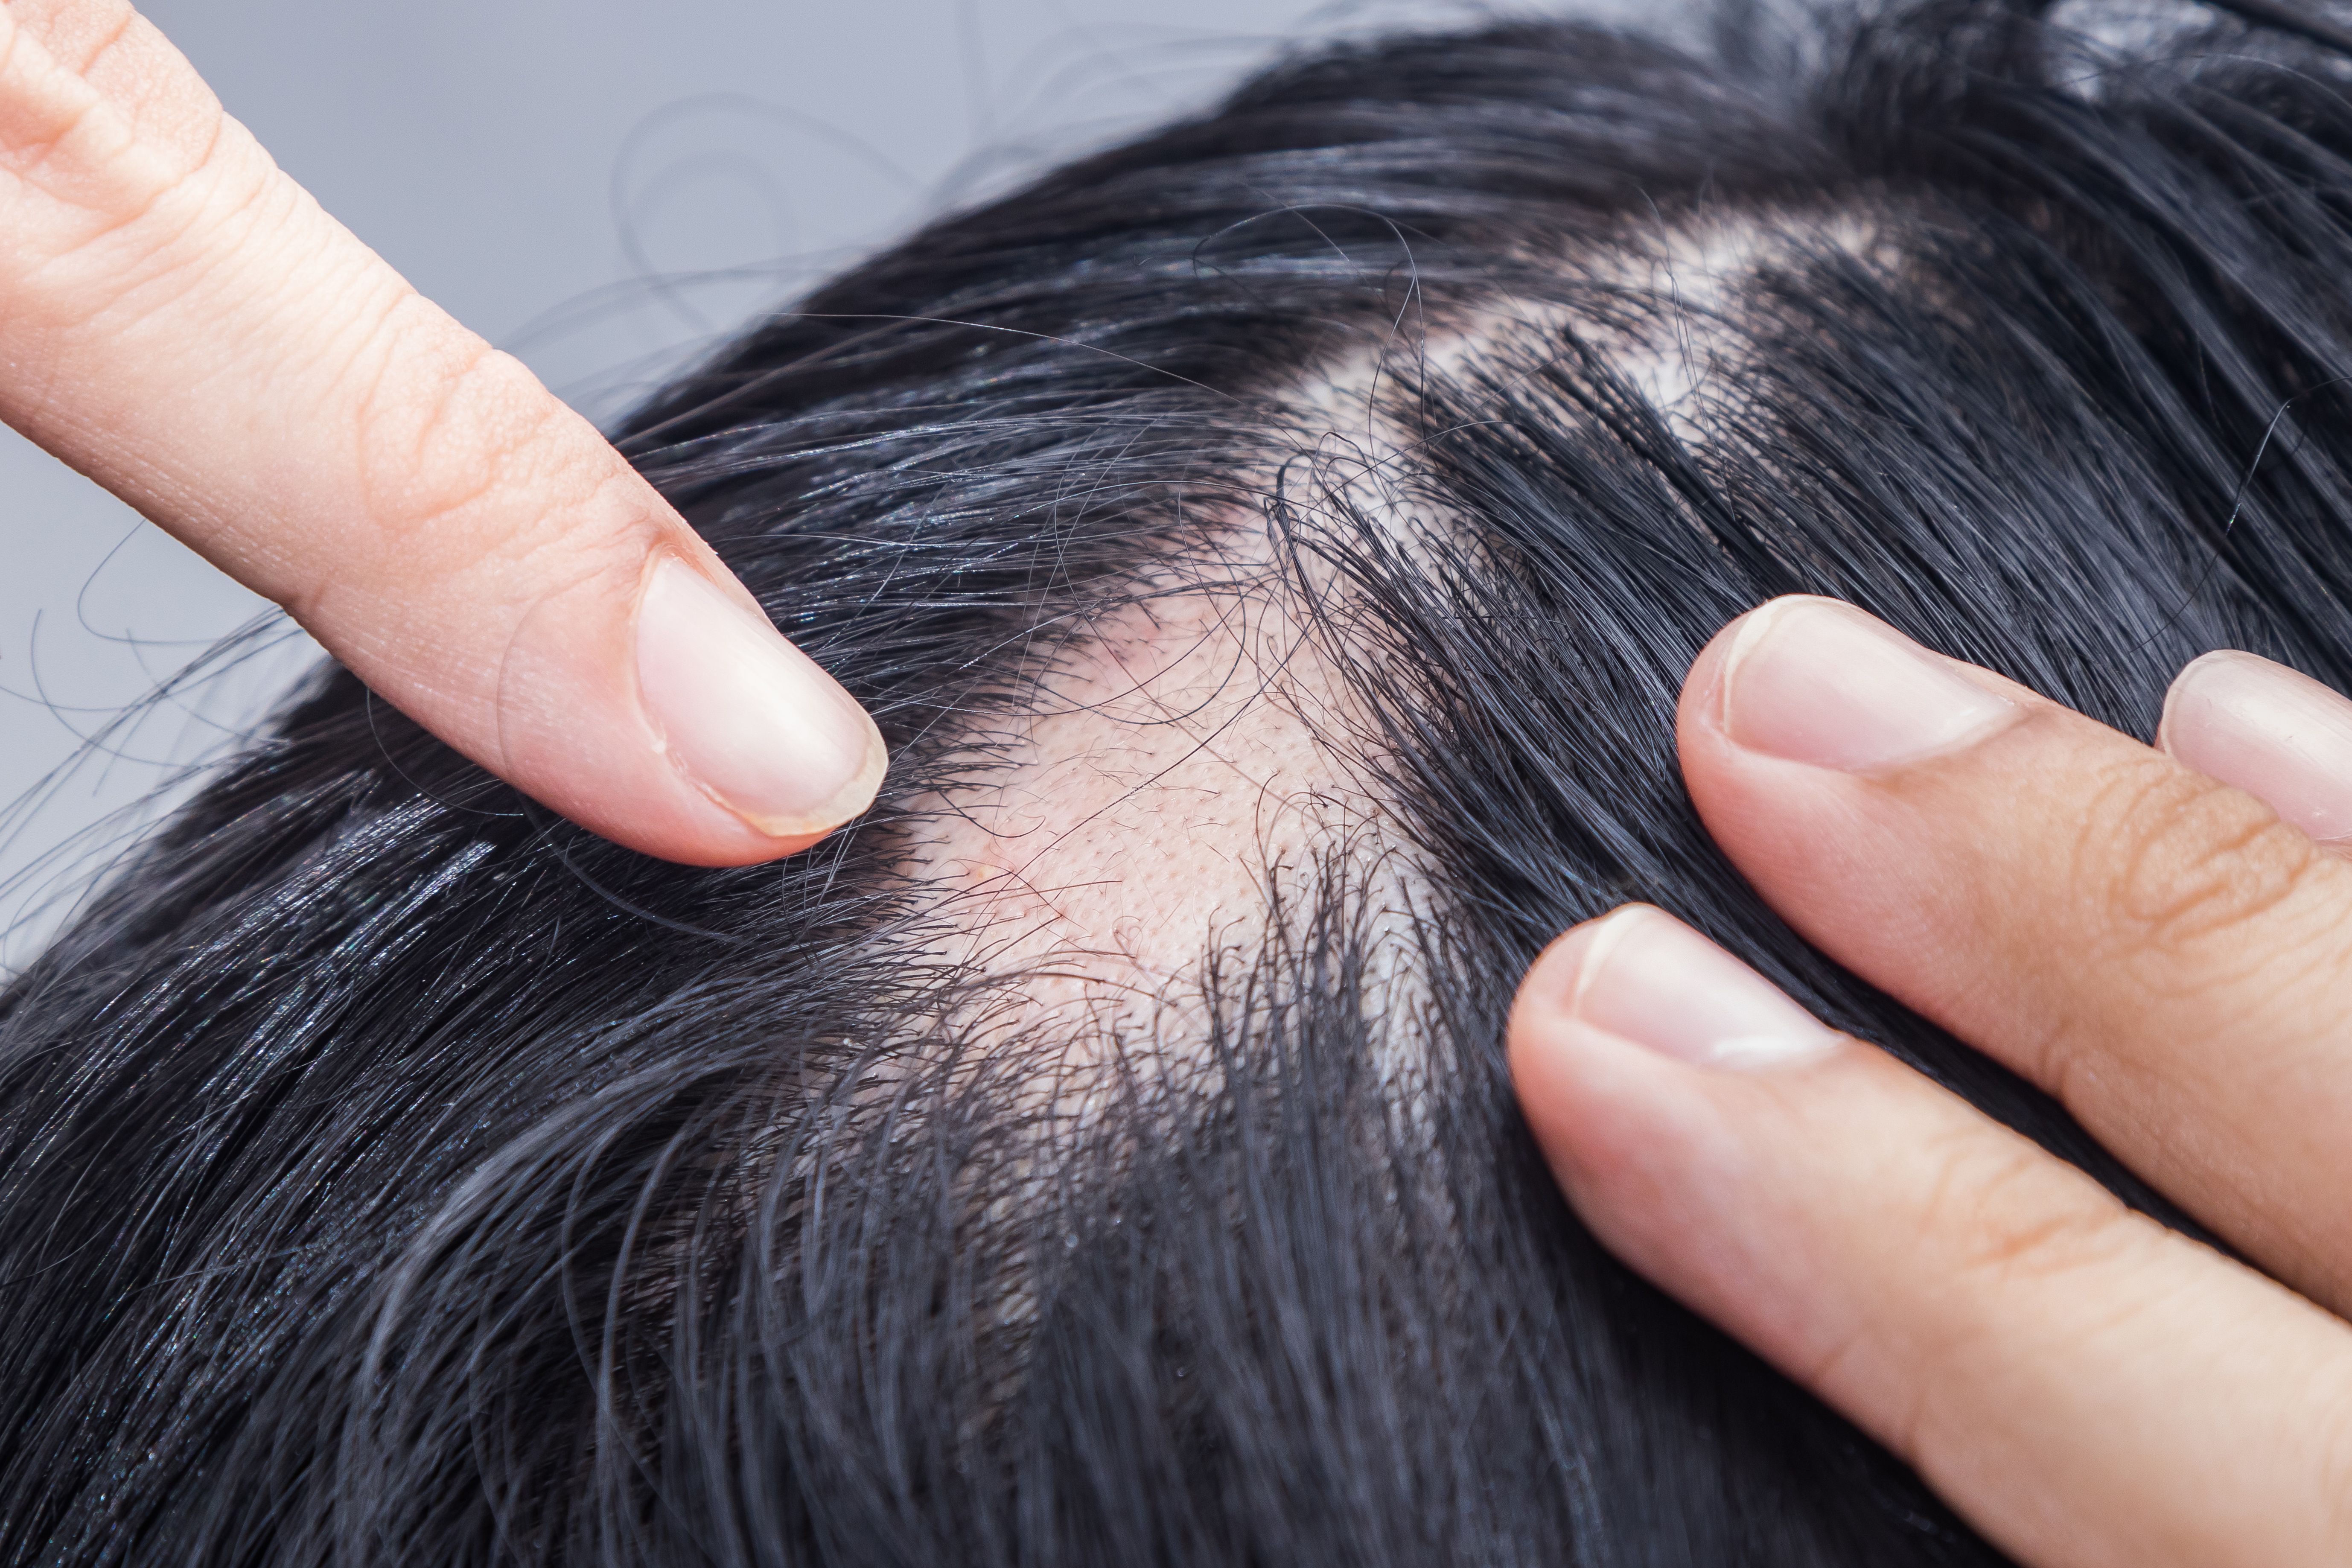 Comprehensive Overview on Therapies for Treating Hair Loss